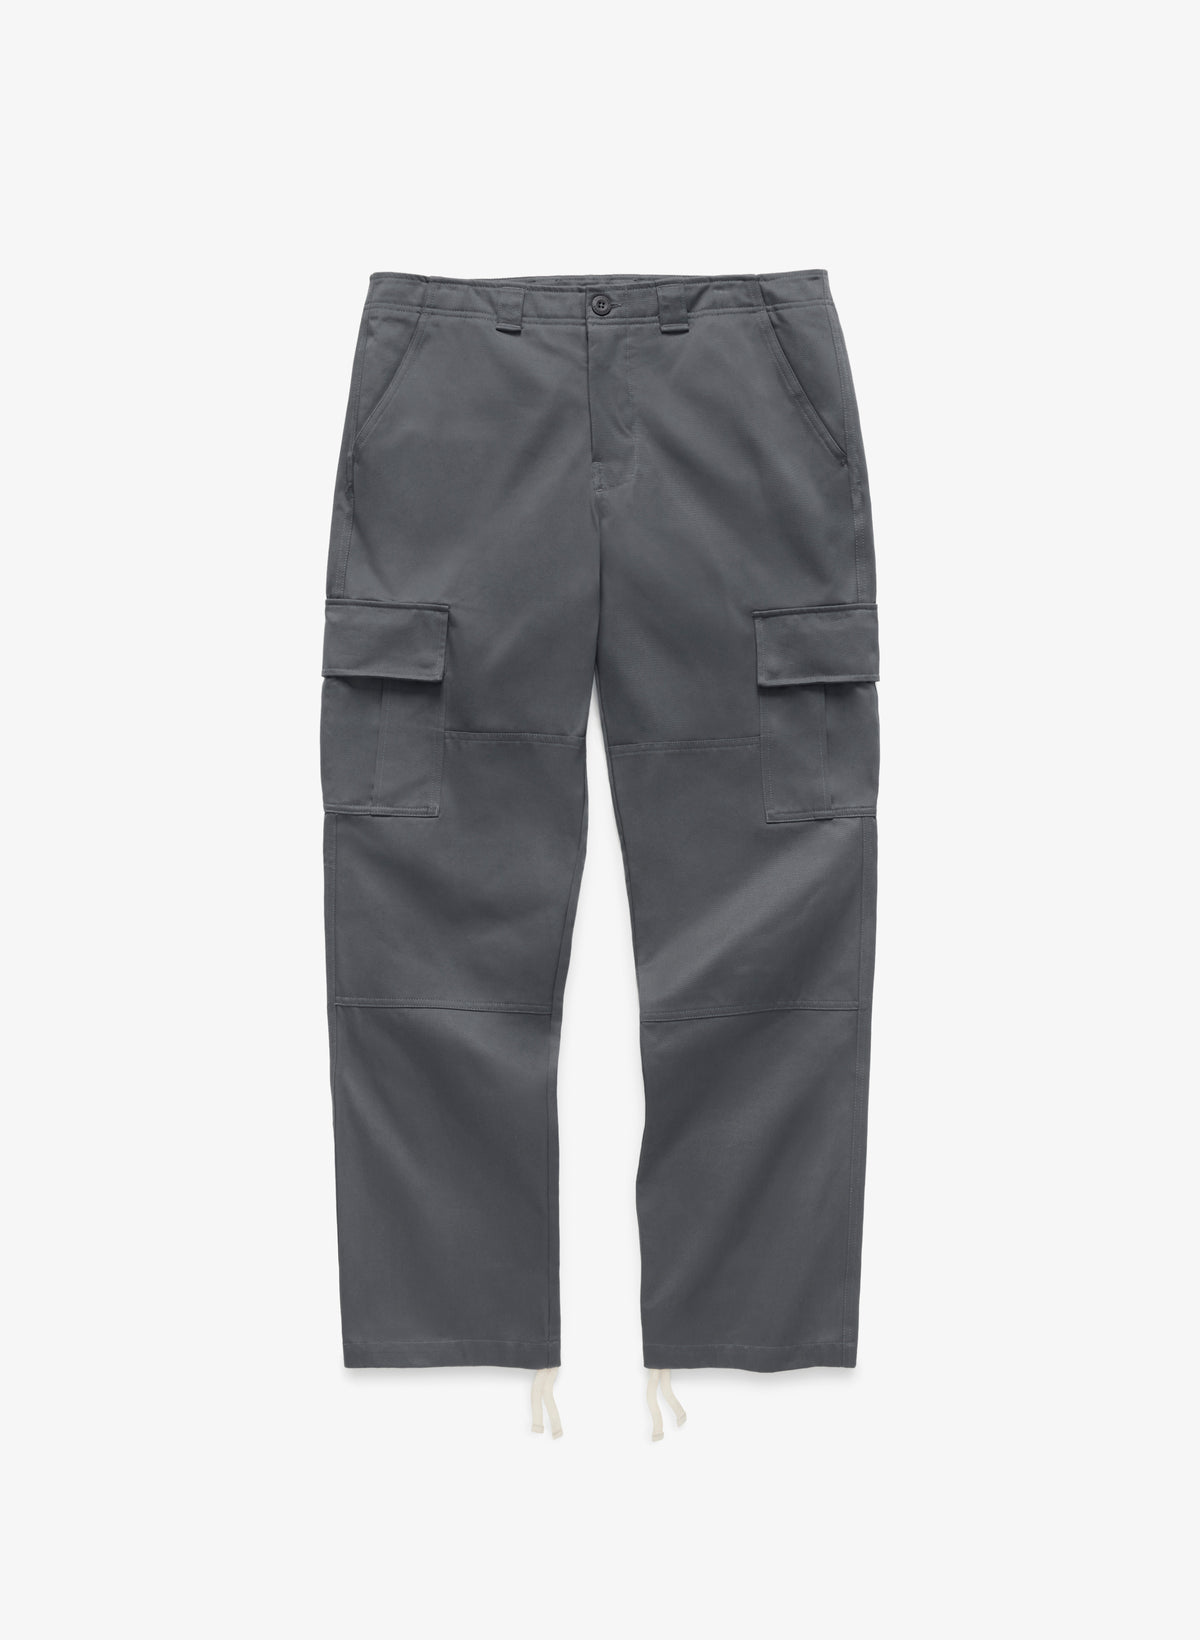 Heavyweight Utility Pant - Charcoal